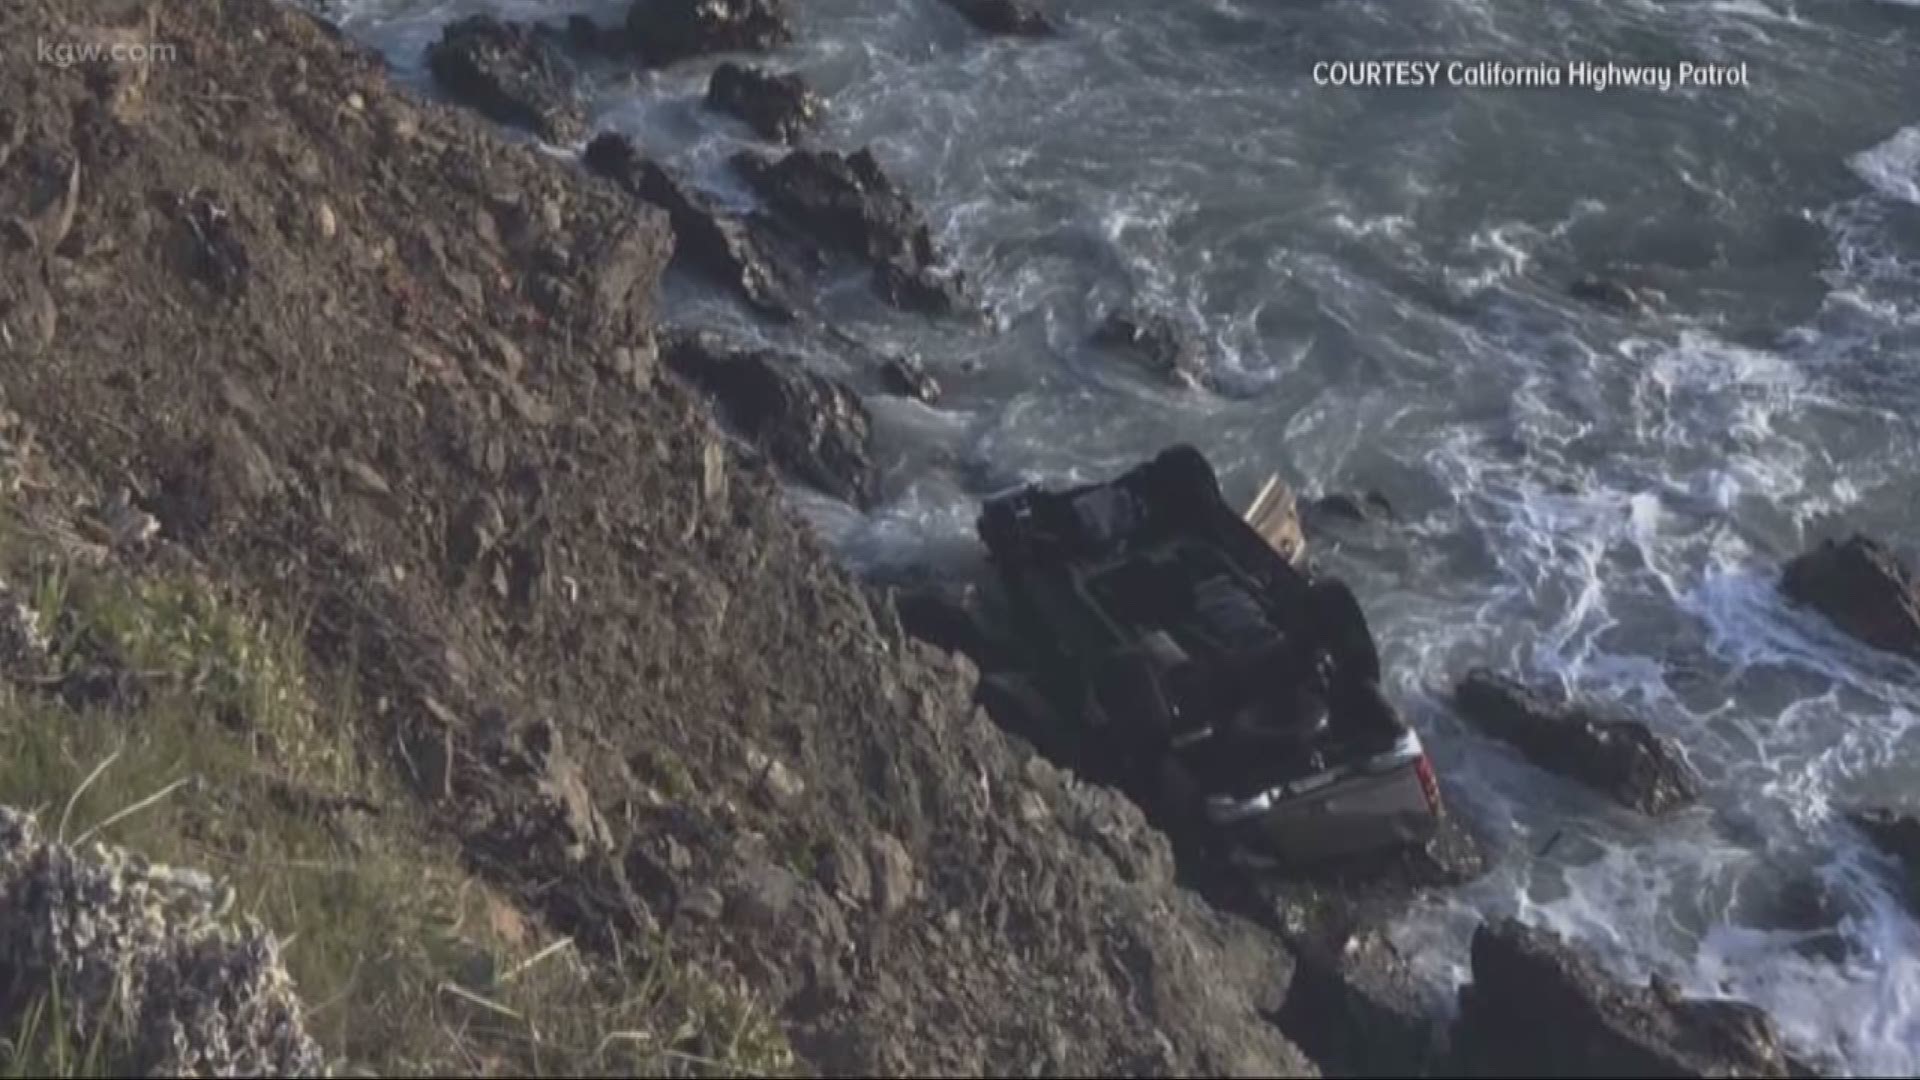 Search for answers after California crash